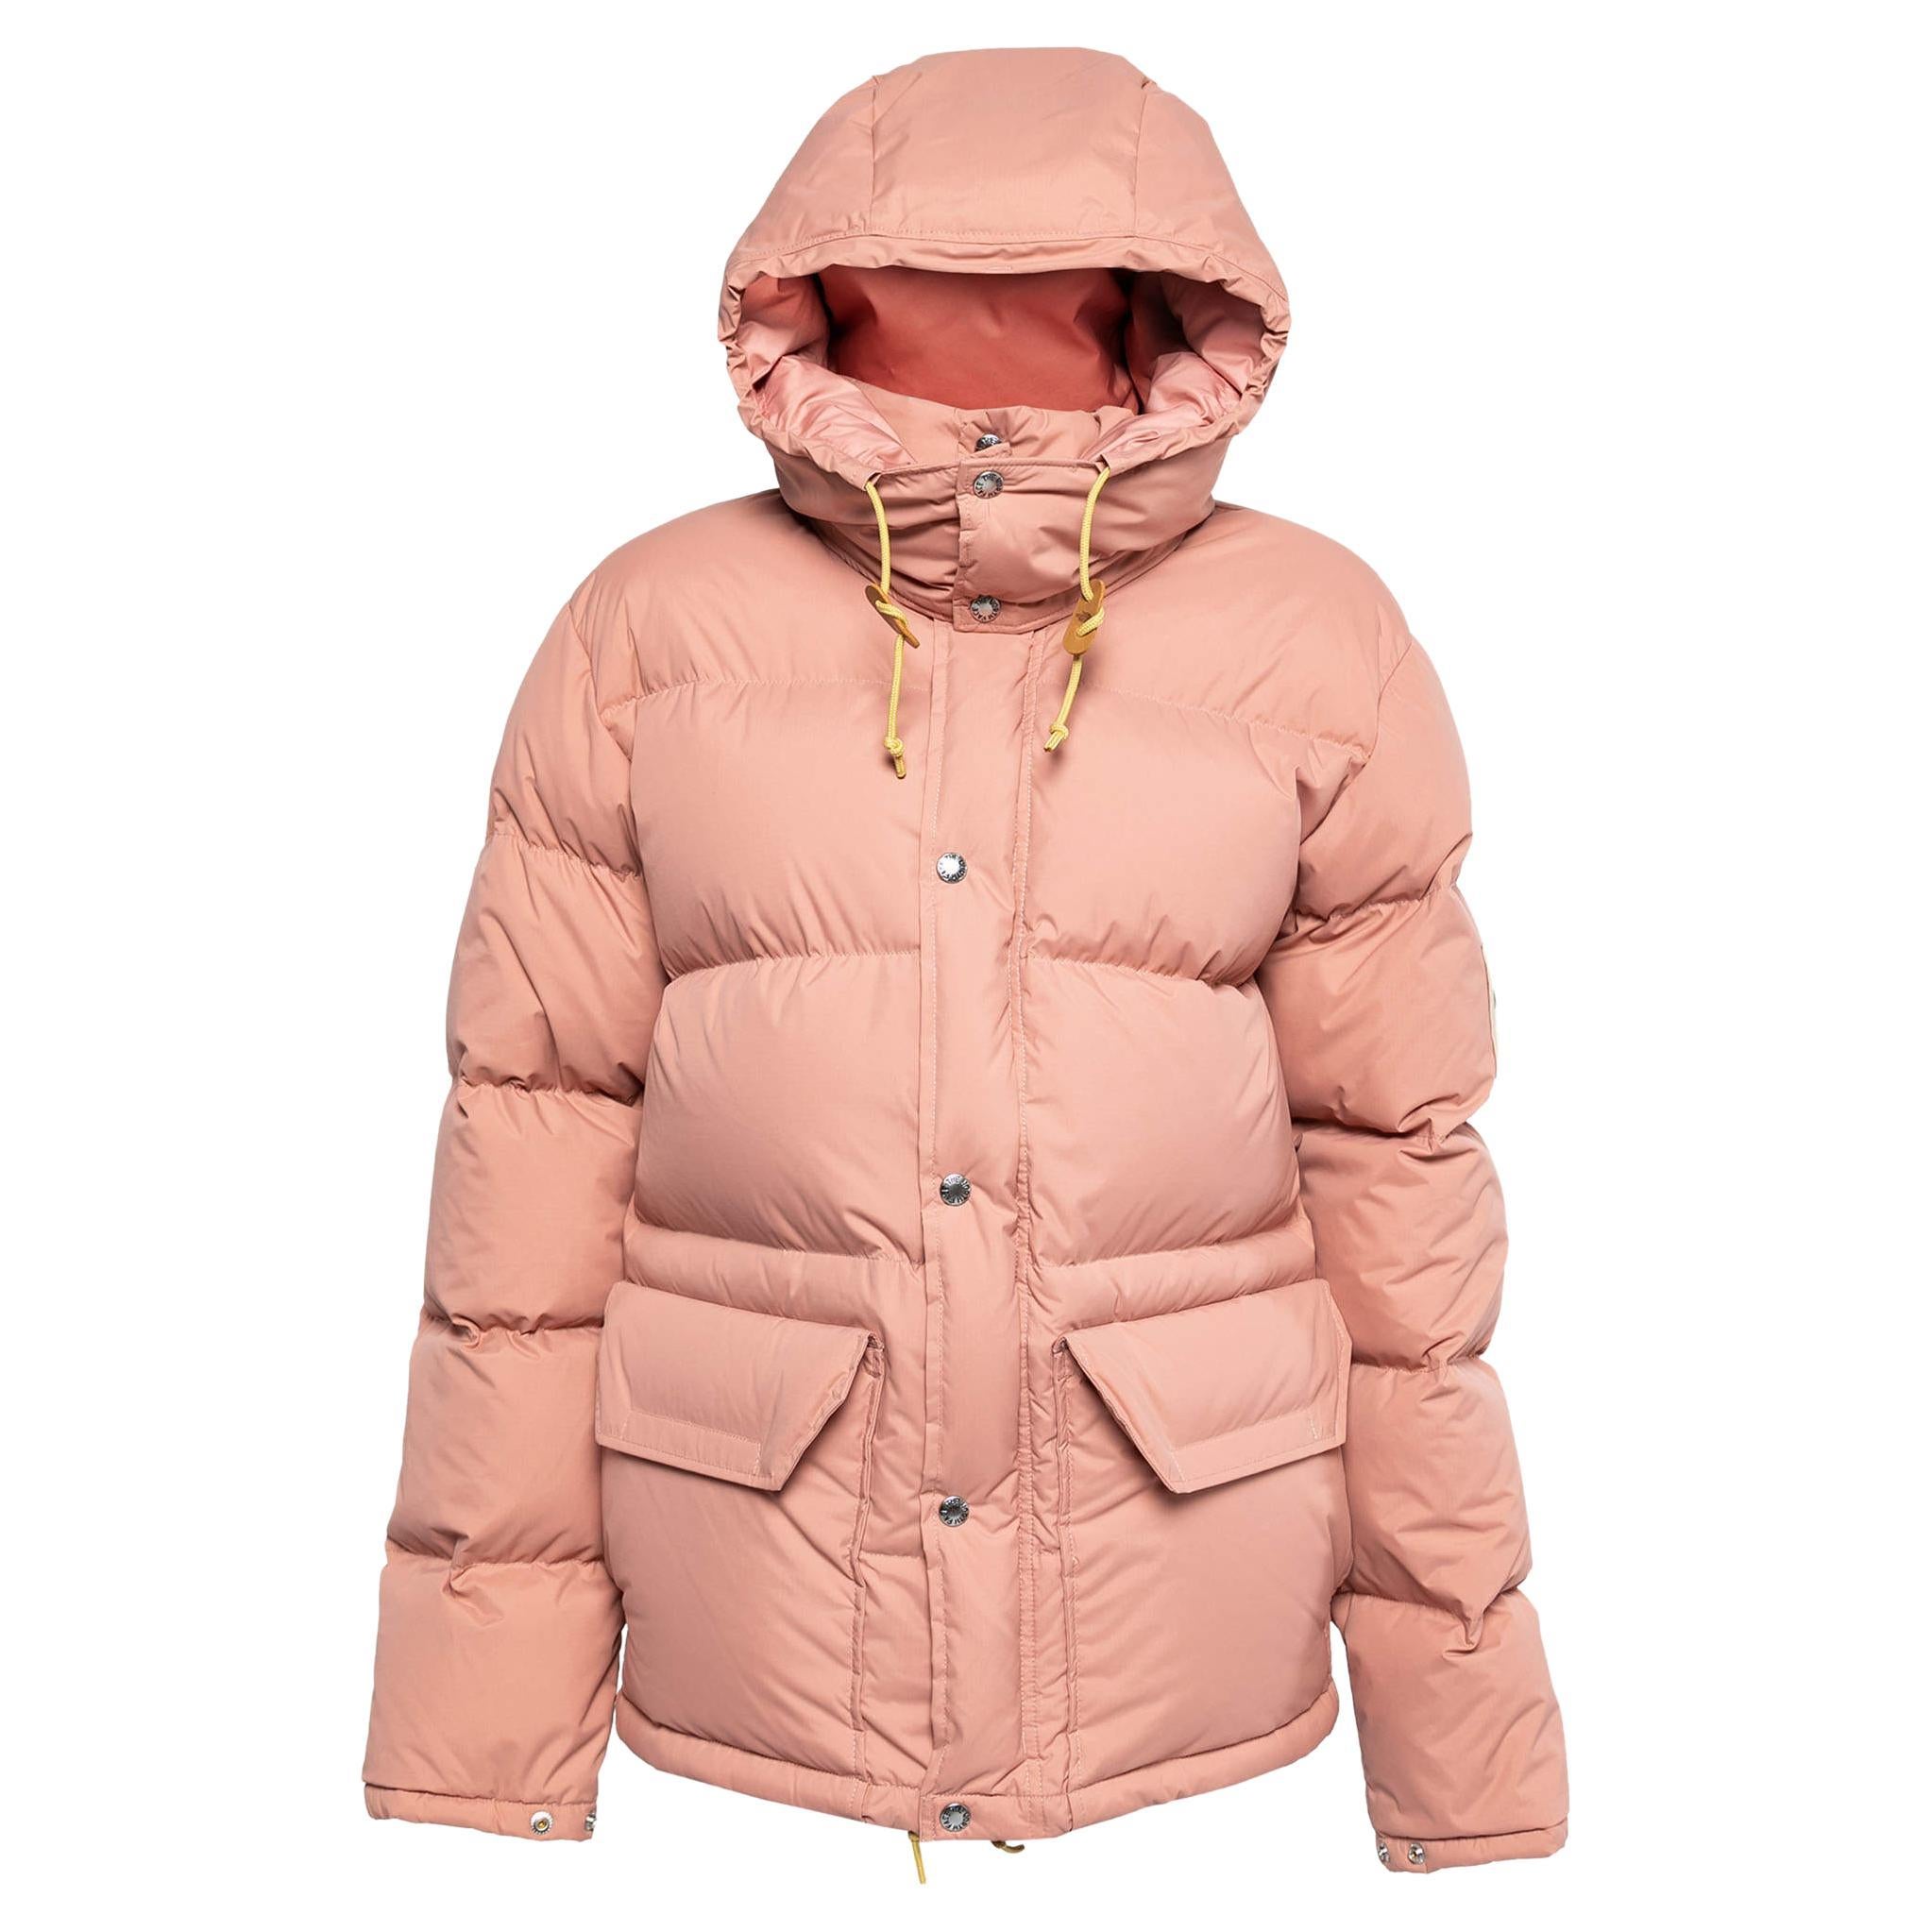 North Face X Gucci Light Pink Down Jacket S For Sale